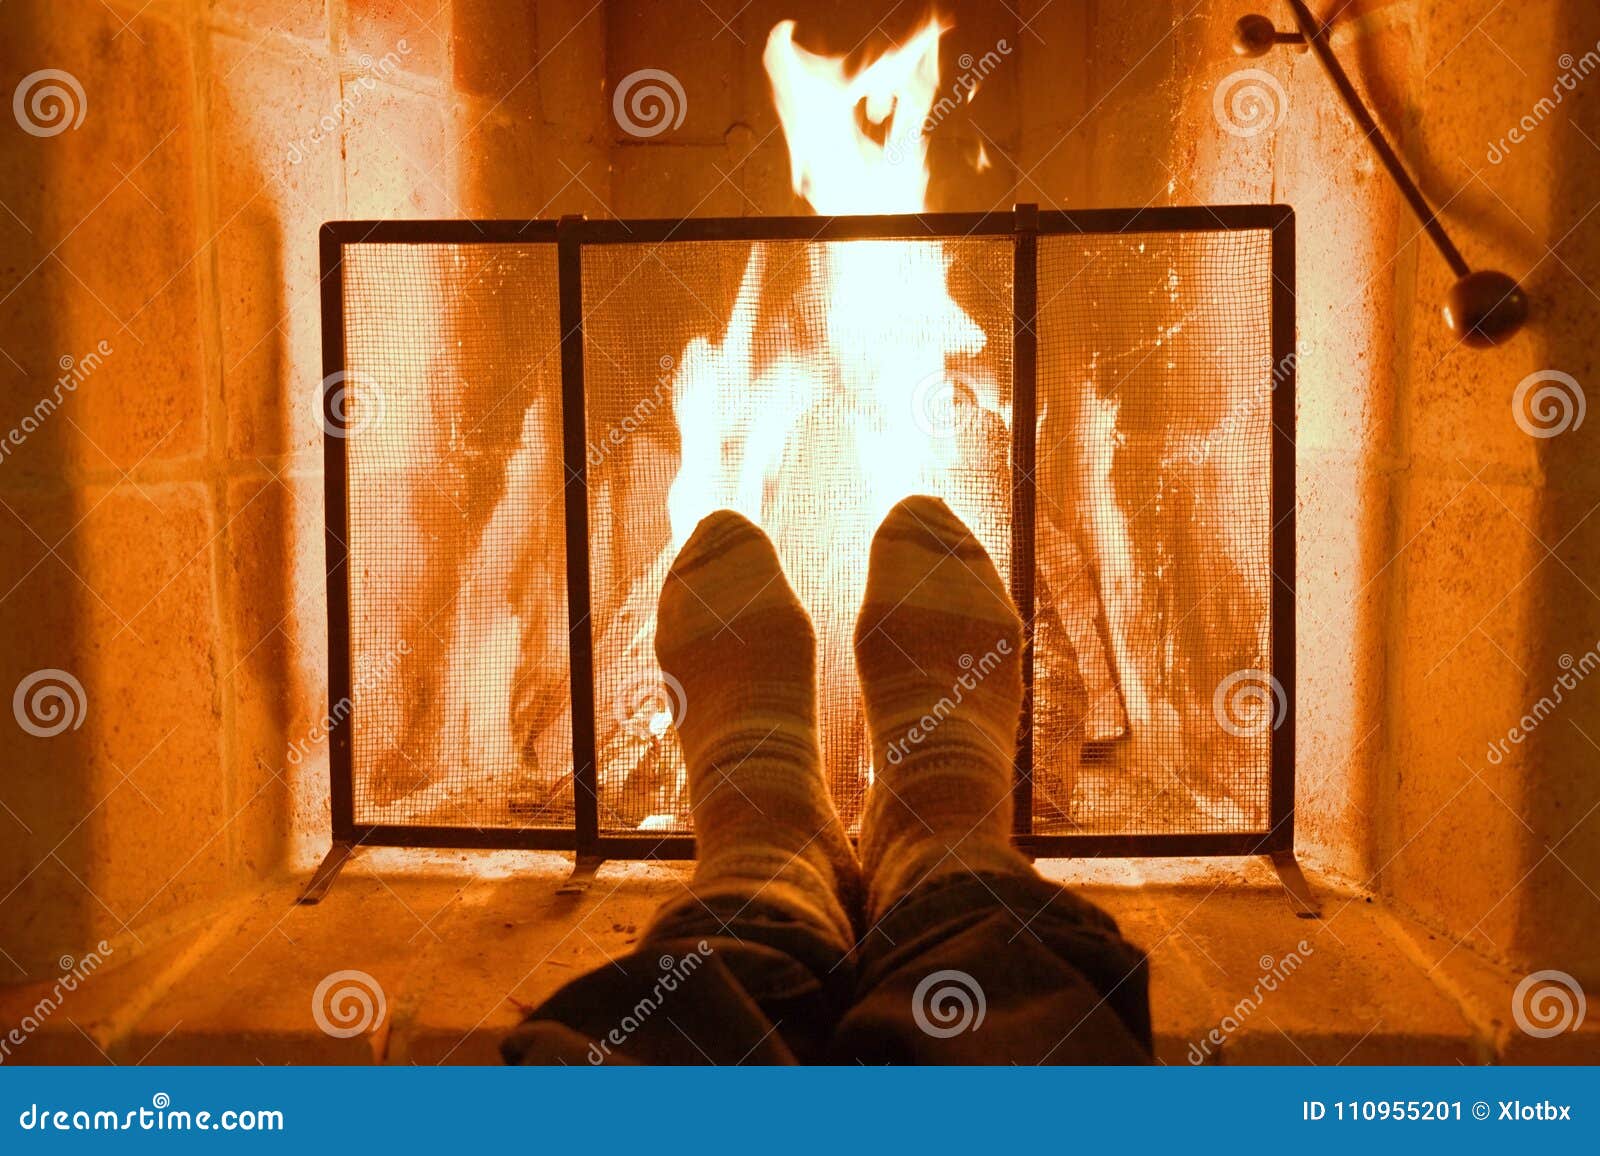 feet warming up on fireplace - a Royalty Free Stock Photo from Photocase